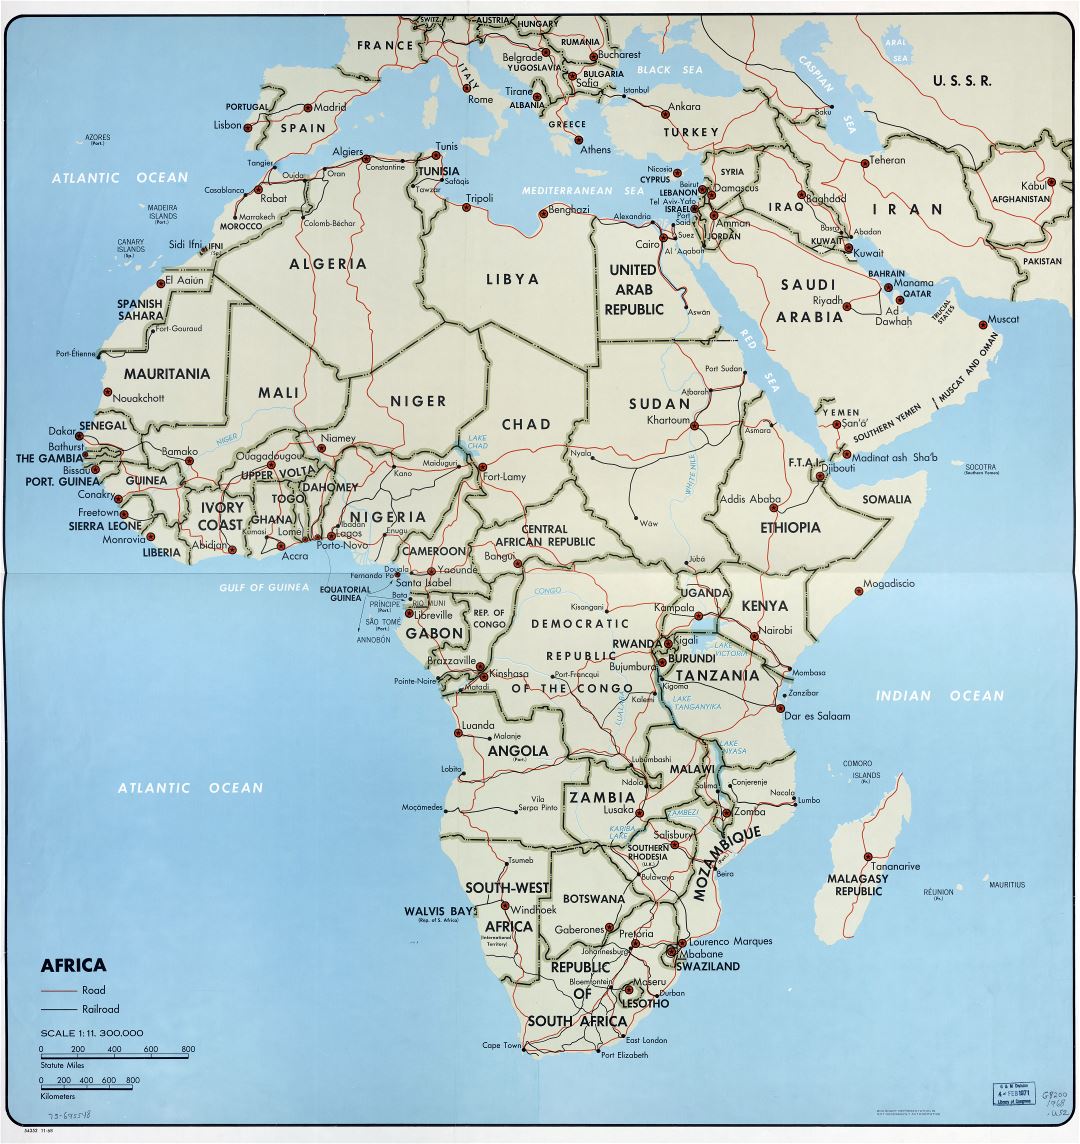 In high resolution detailed political map of Africa with the marks of capitals, major cities, major roads, railroads and names of countries - 1968